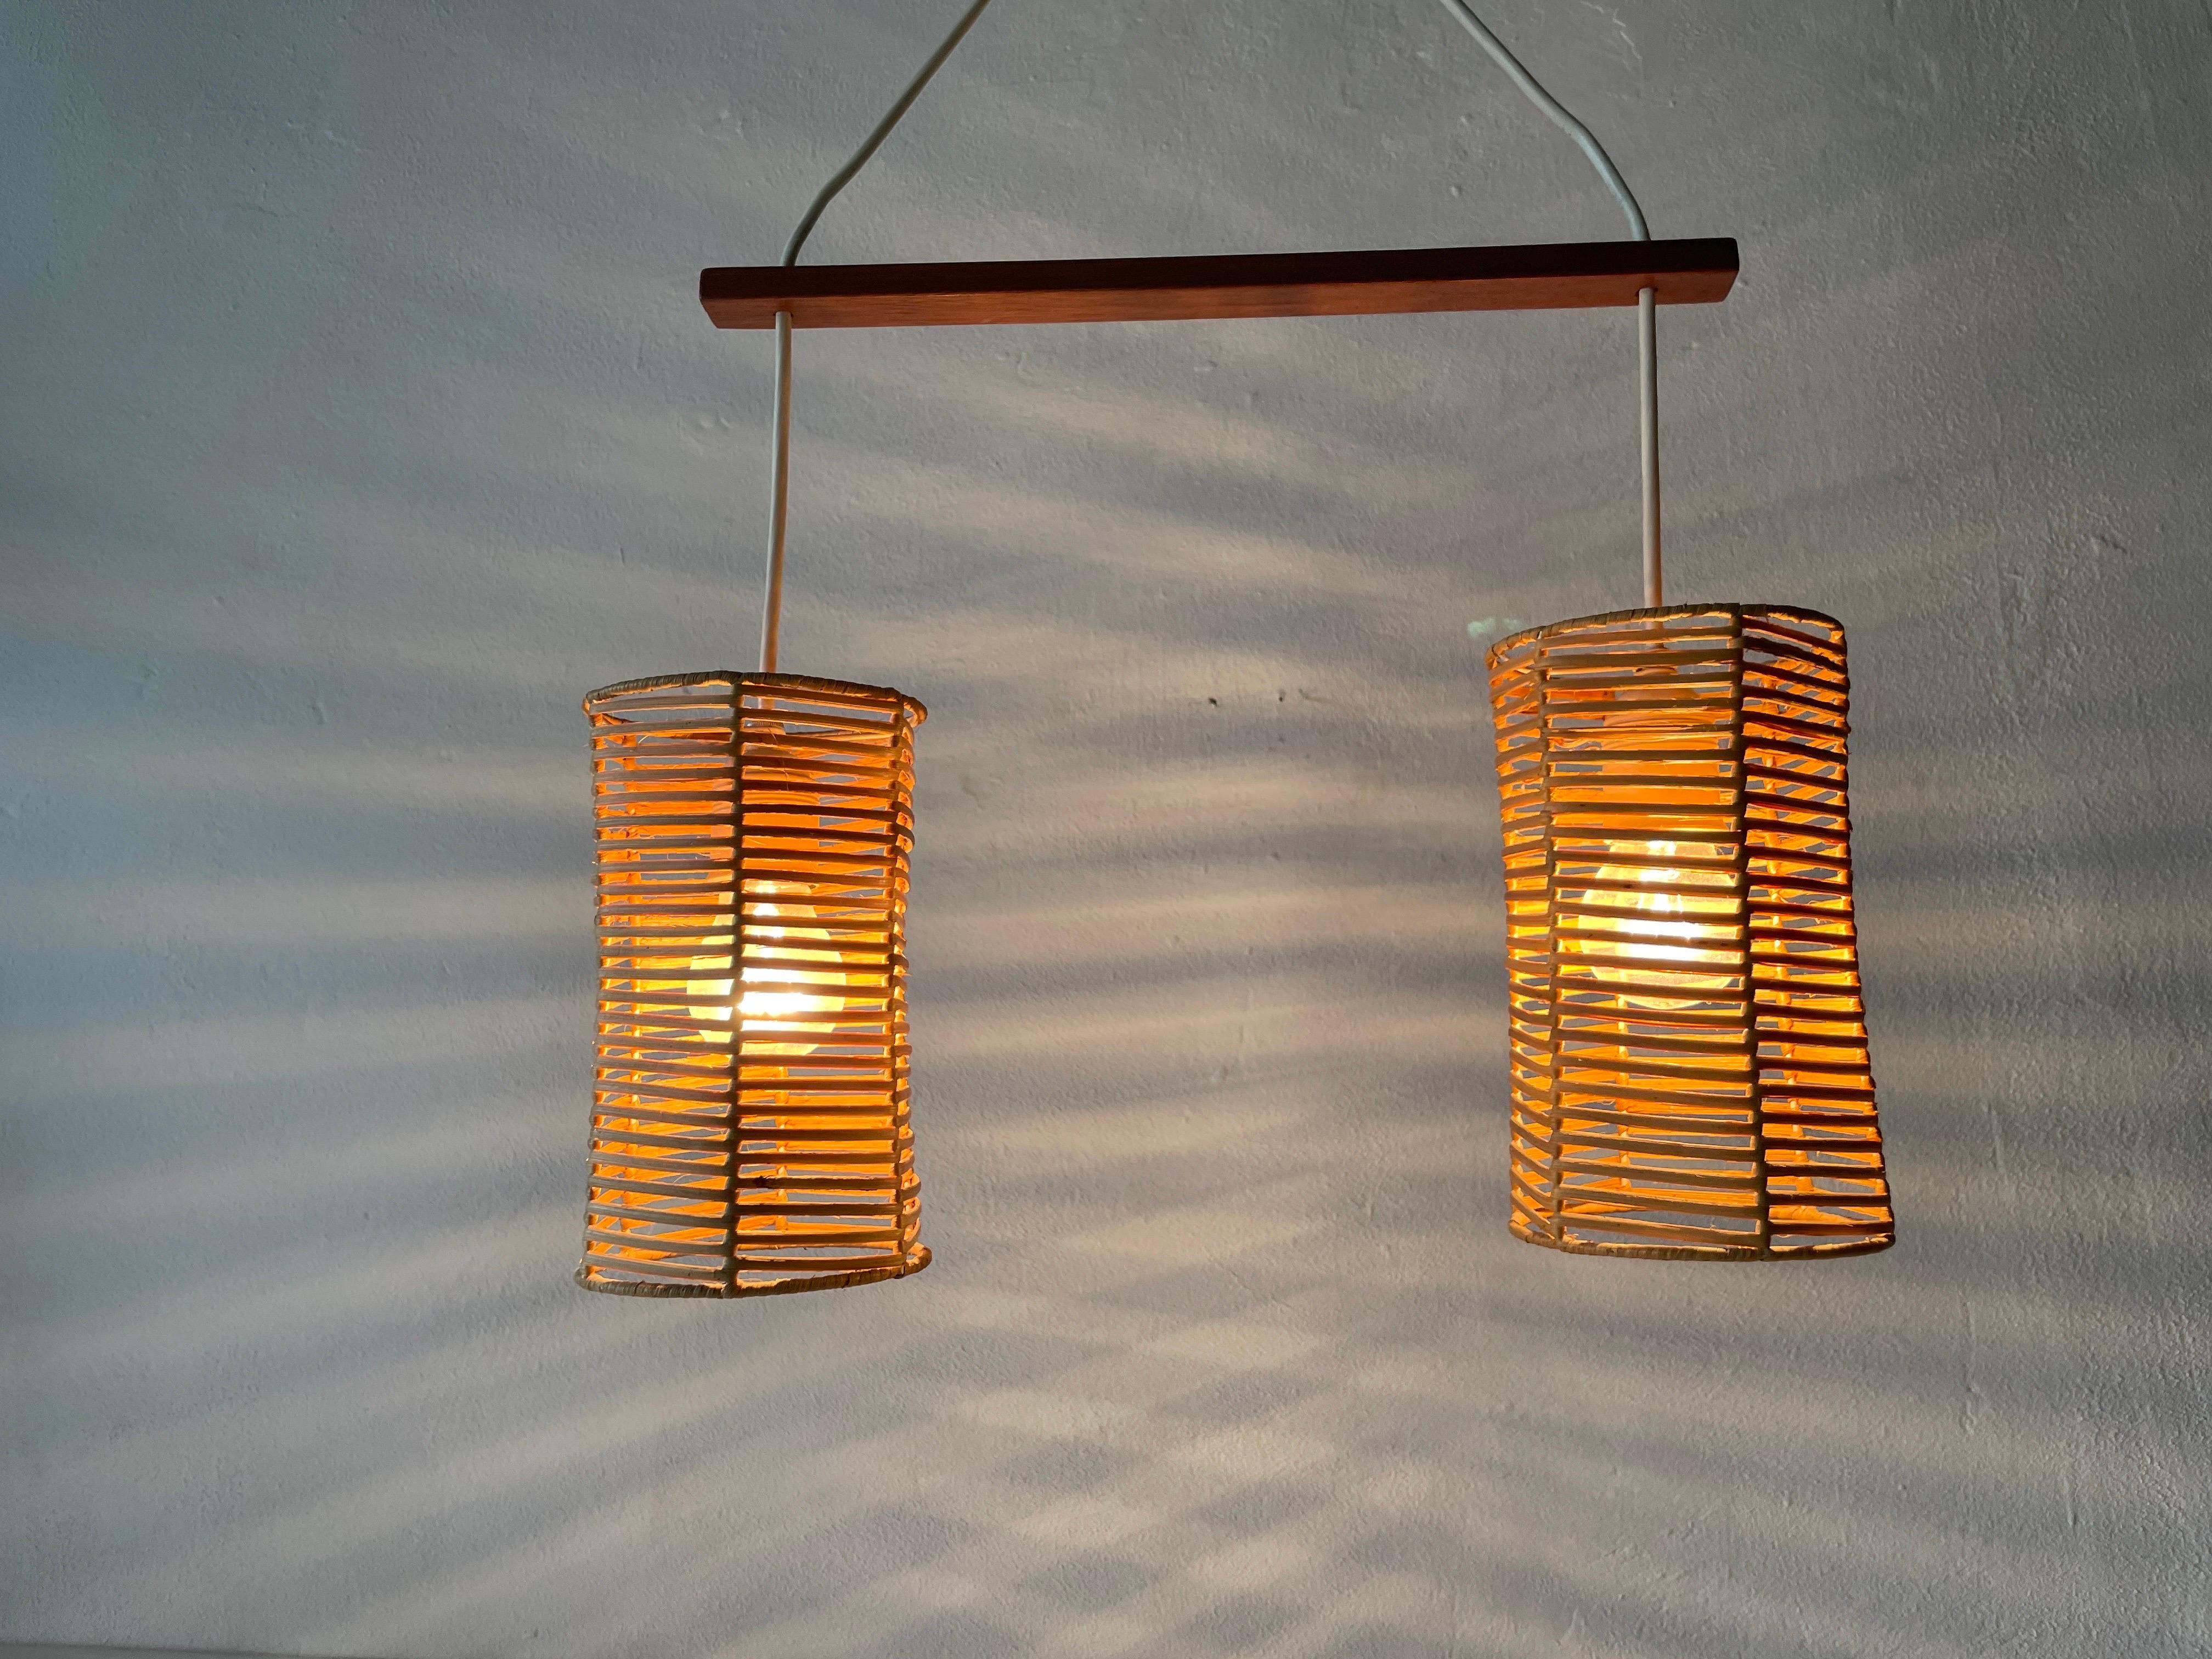 Double Shade Wicker and Wood Pendant Lamp, 1960s, Germany For Sale 3